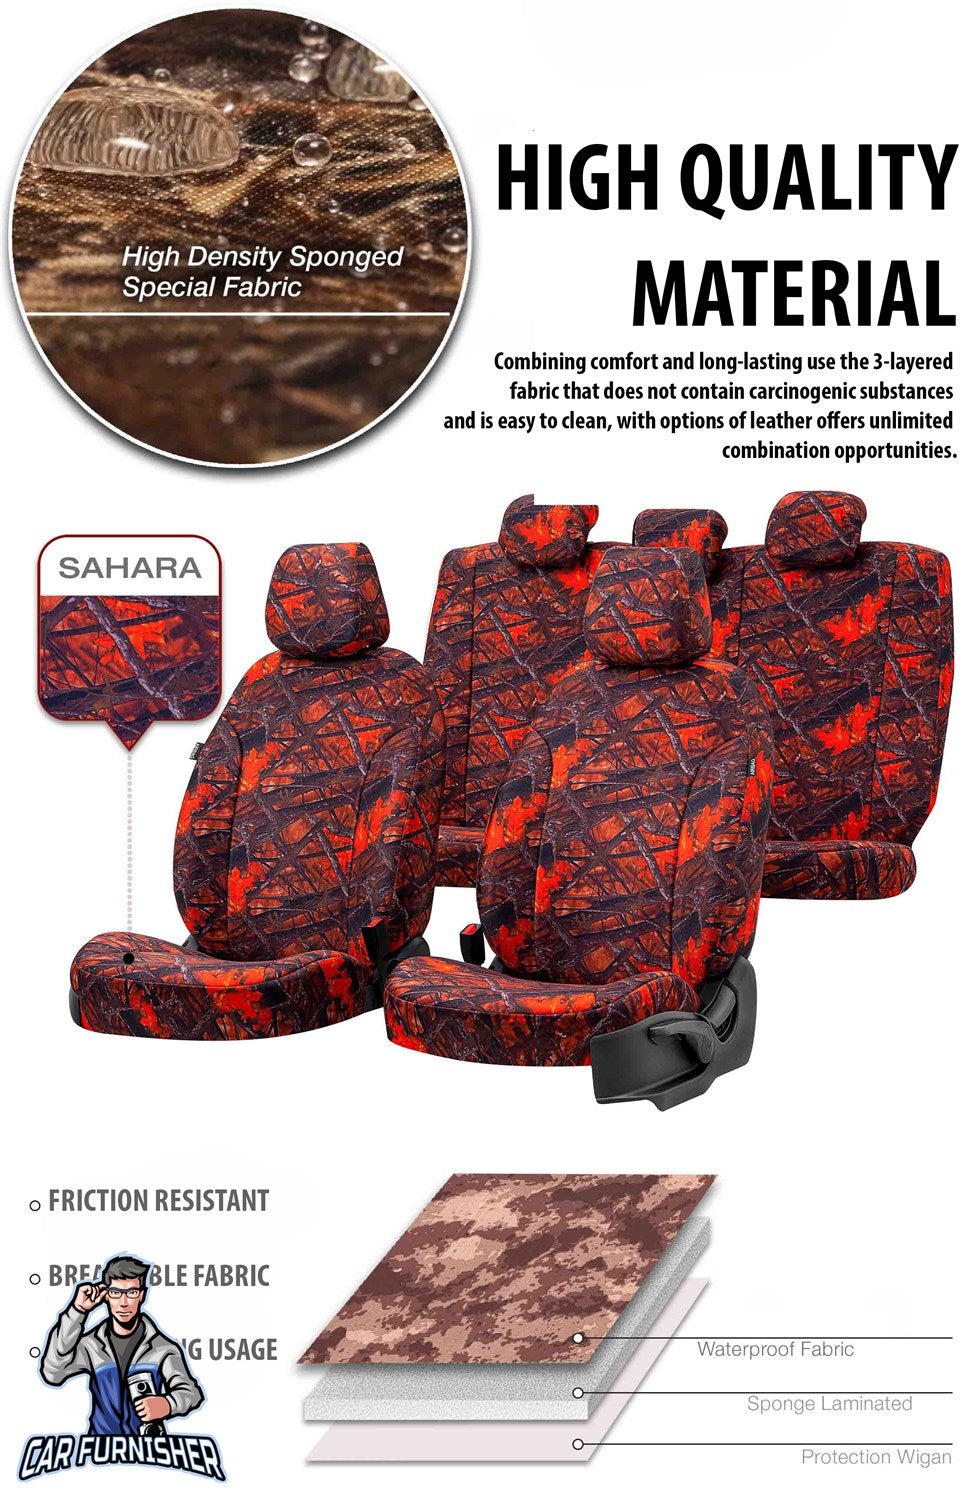 Peugeot Boxer Car Seat Covers 2006-2023 Camouflage Design Everest Camo Fabric